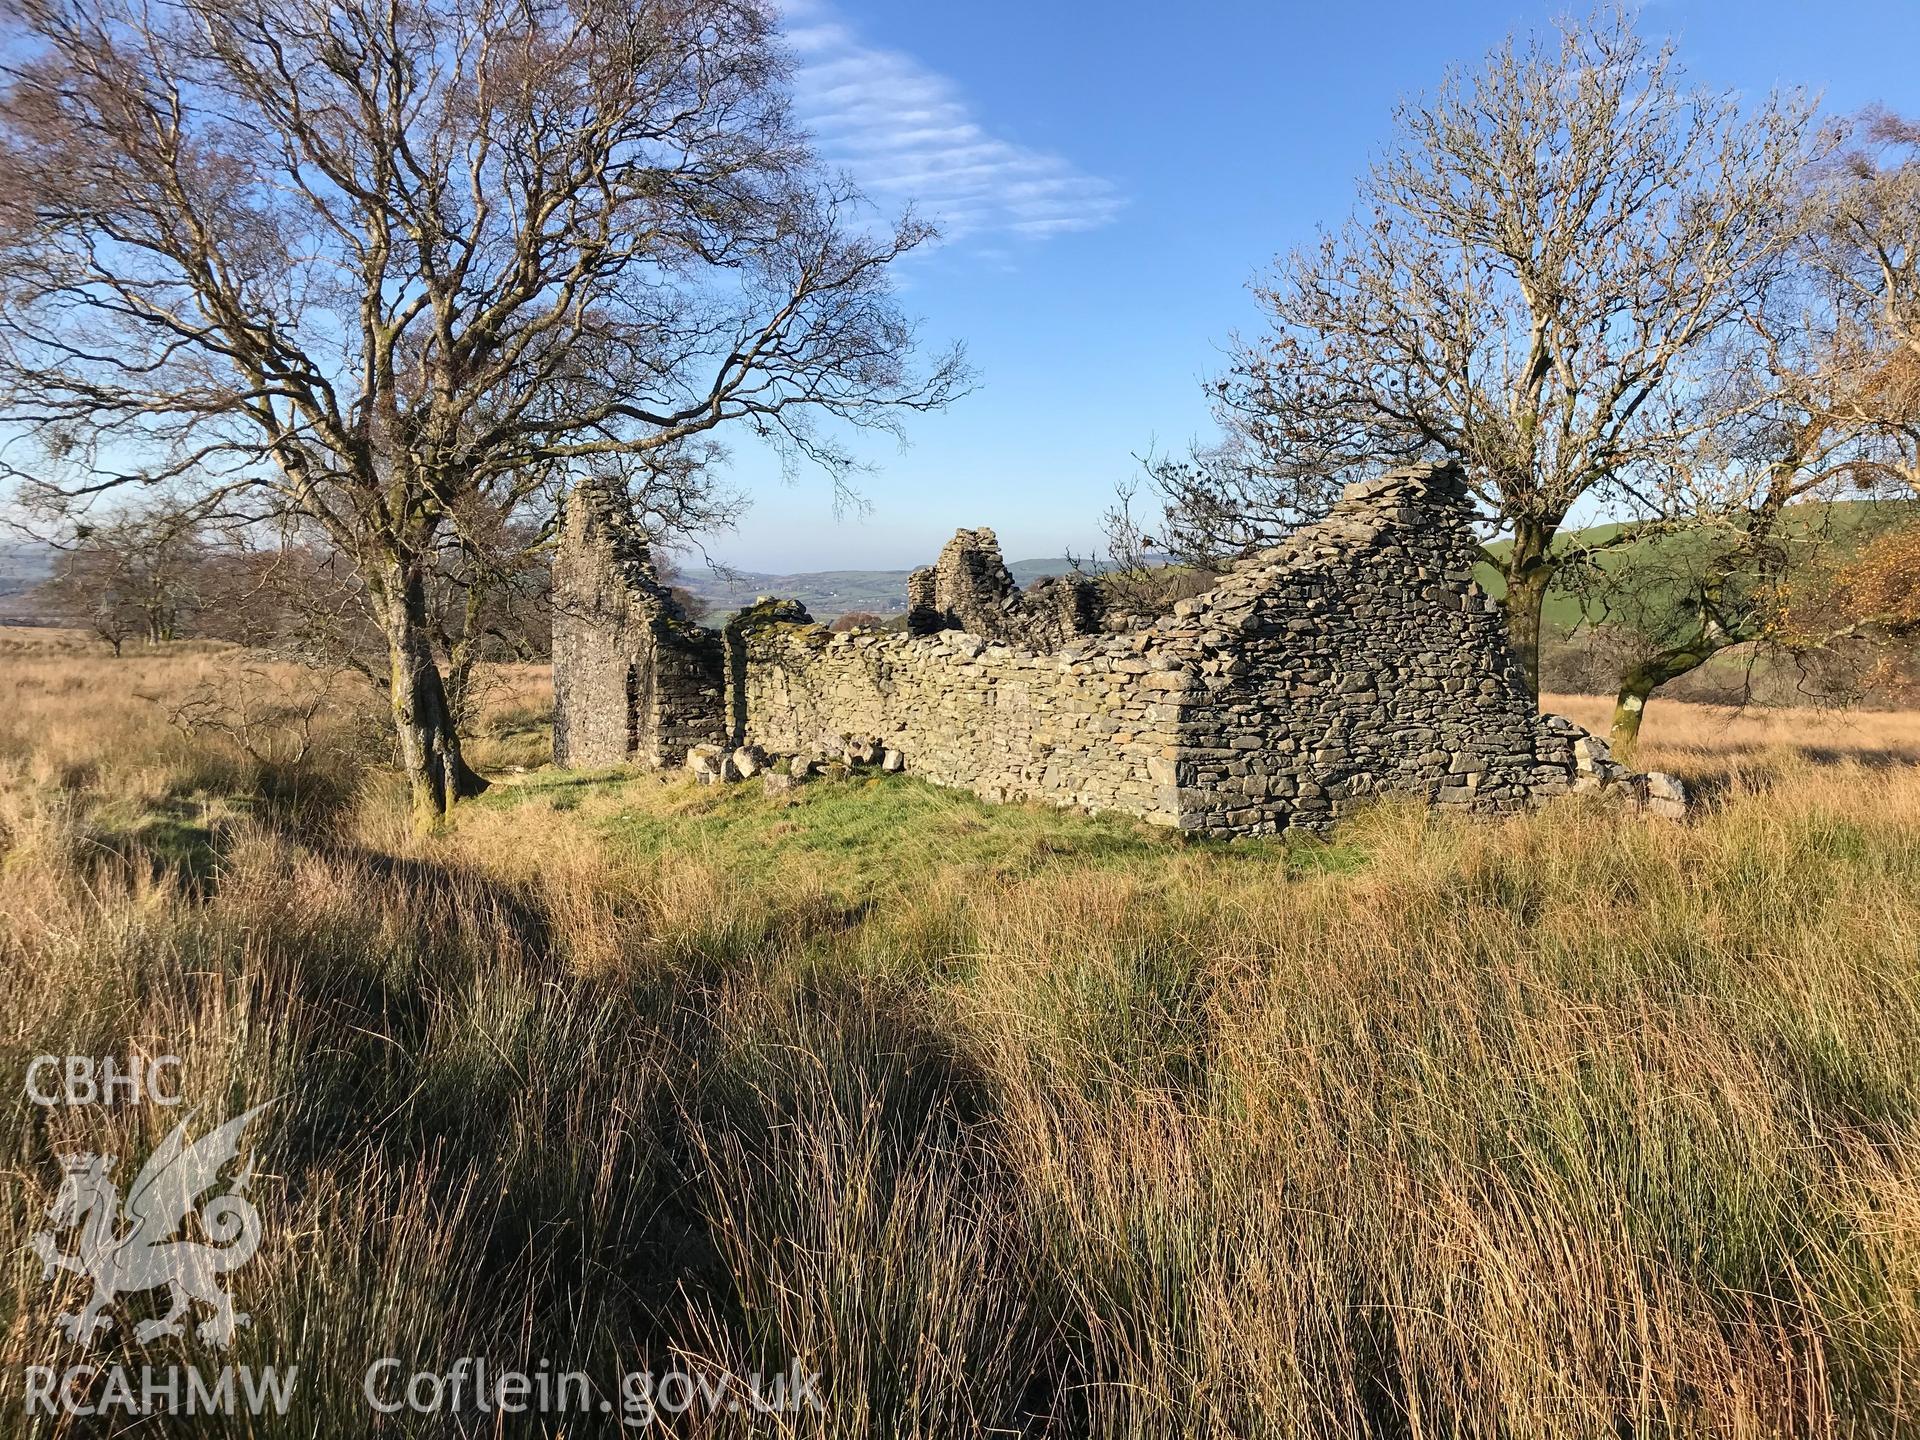 Exterior view of the remains of the drystone walled Pen-Cwm house, south west of Bryneithinog farm, Ystrad Fflur. Colour photograph taken by Paul R. Davis on 18th November 2018.